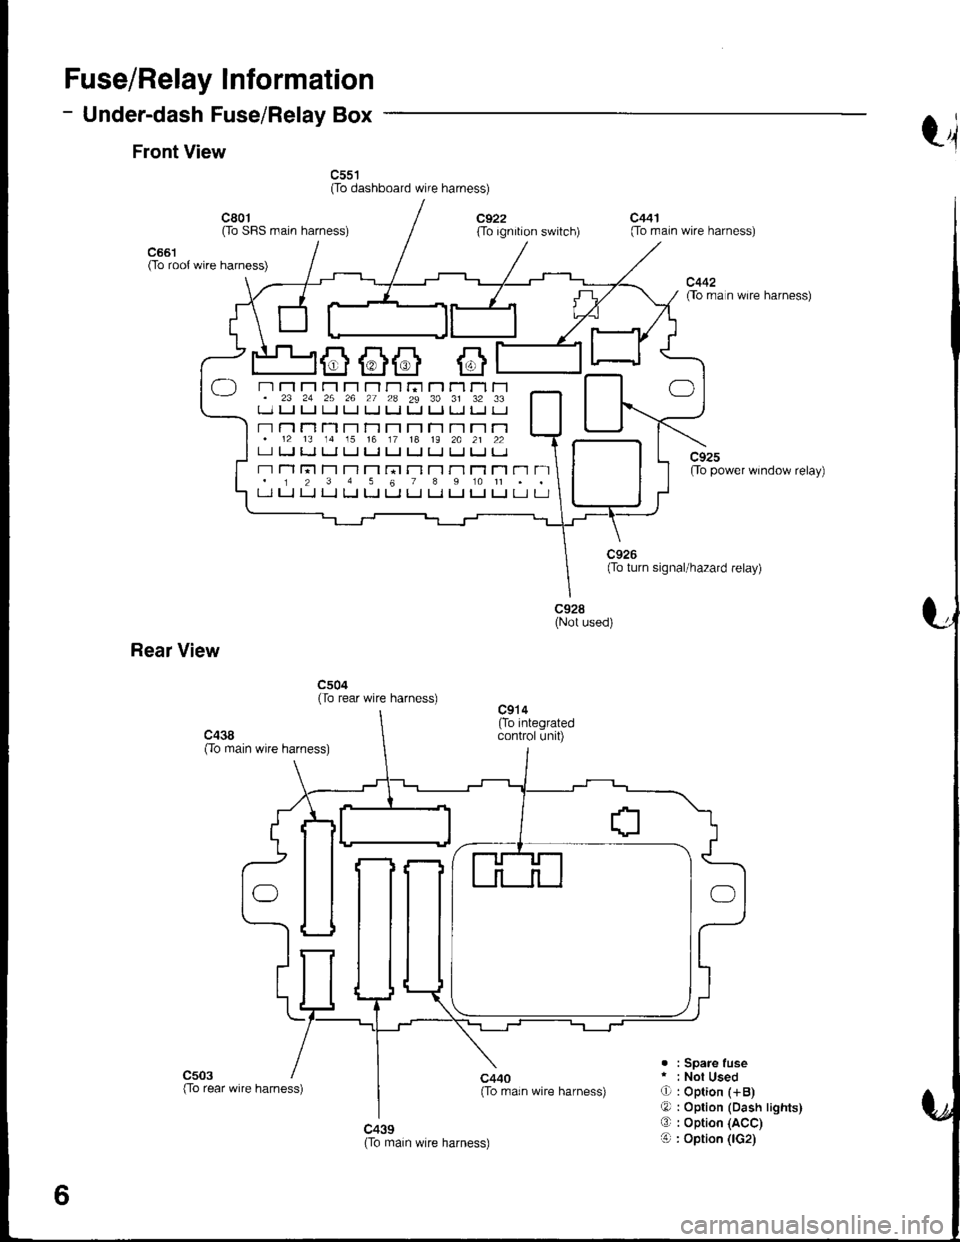 HONDA INTEGRA 1998 4.G Workshop Manual Fuse/Relay Information
- Under-dash Fuse/Relay Box
Front Viewt4
c55t(To dashboard wire harness)
c661(To root wire harness)
c801Oo SFIS main harness)c922(To ignition switch)
c440{To rrain wire harness